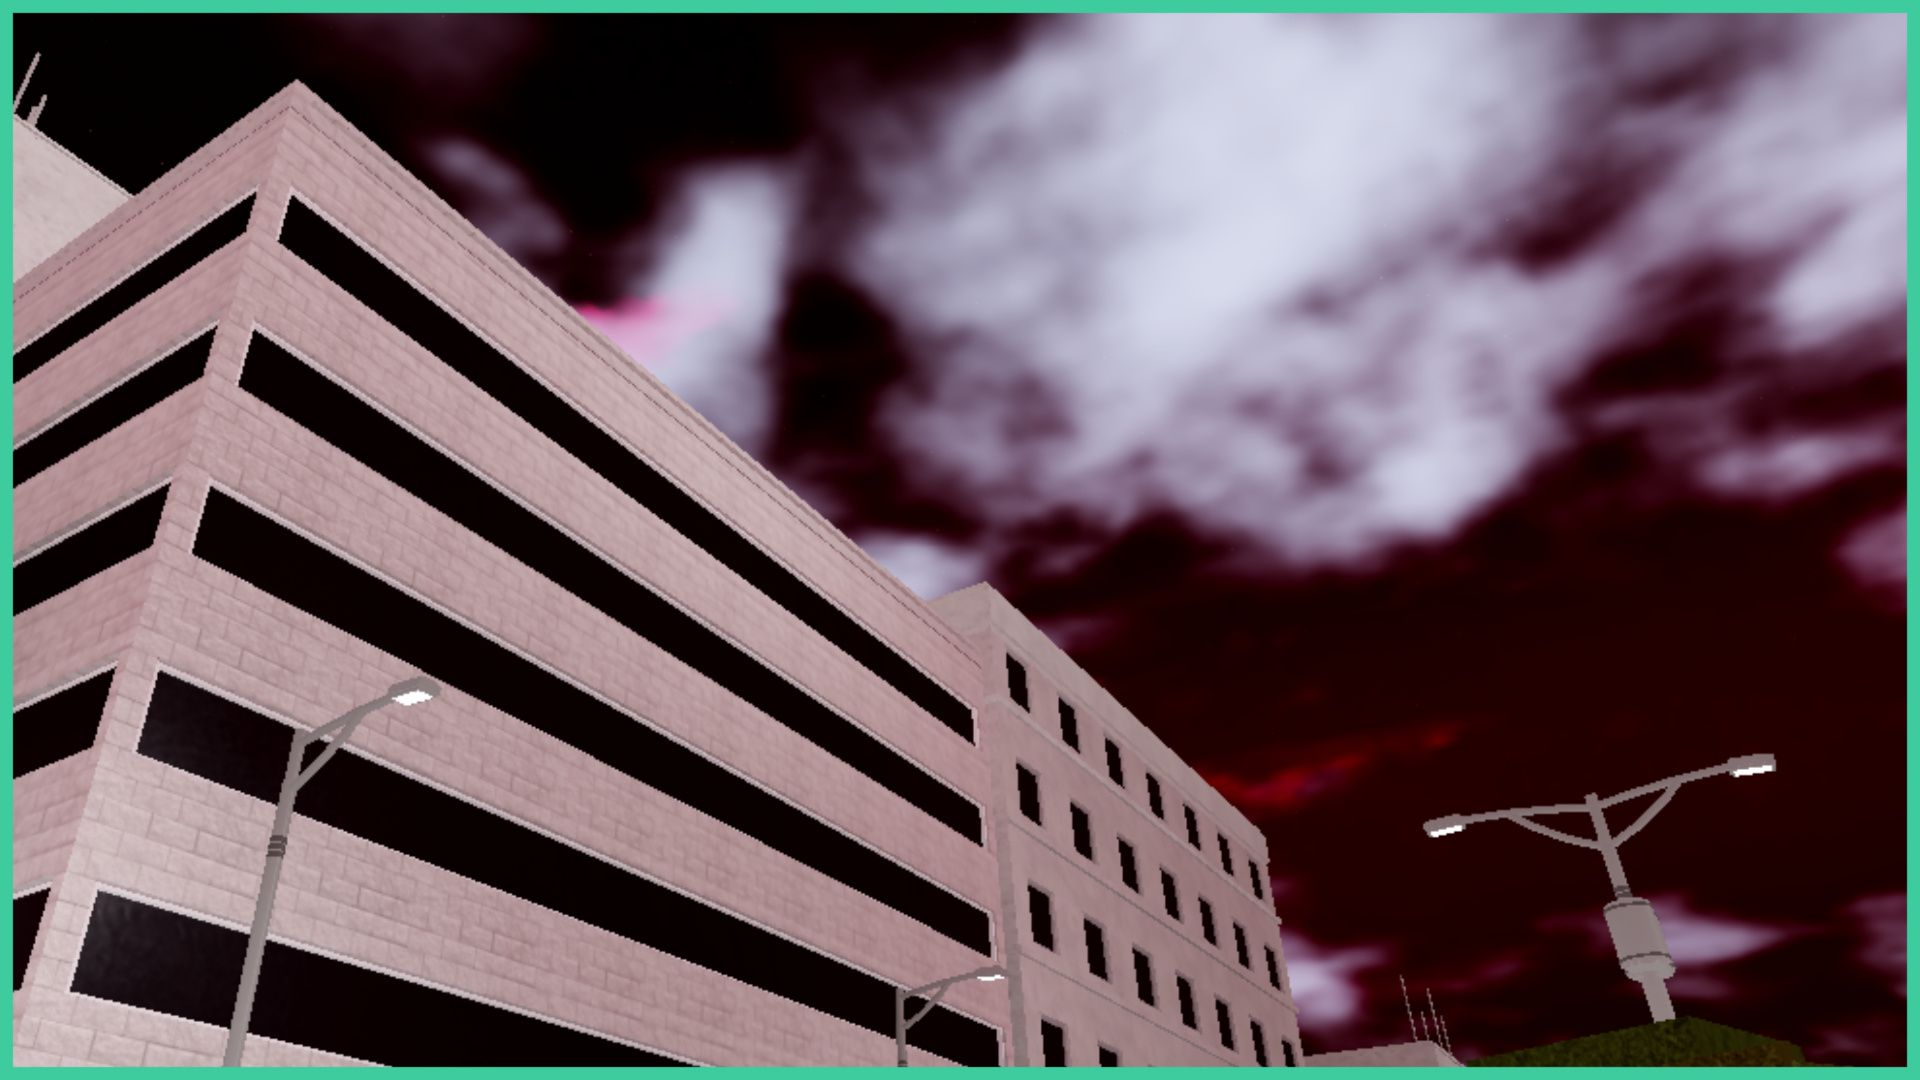 feature image for our type soul arrancar weapon tier list, the image features a screenshot of a crimson sky with clouds with large office buildings and street lamps